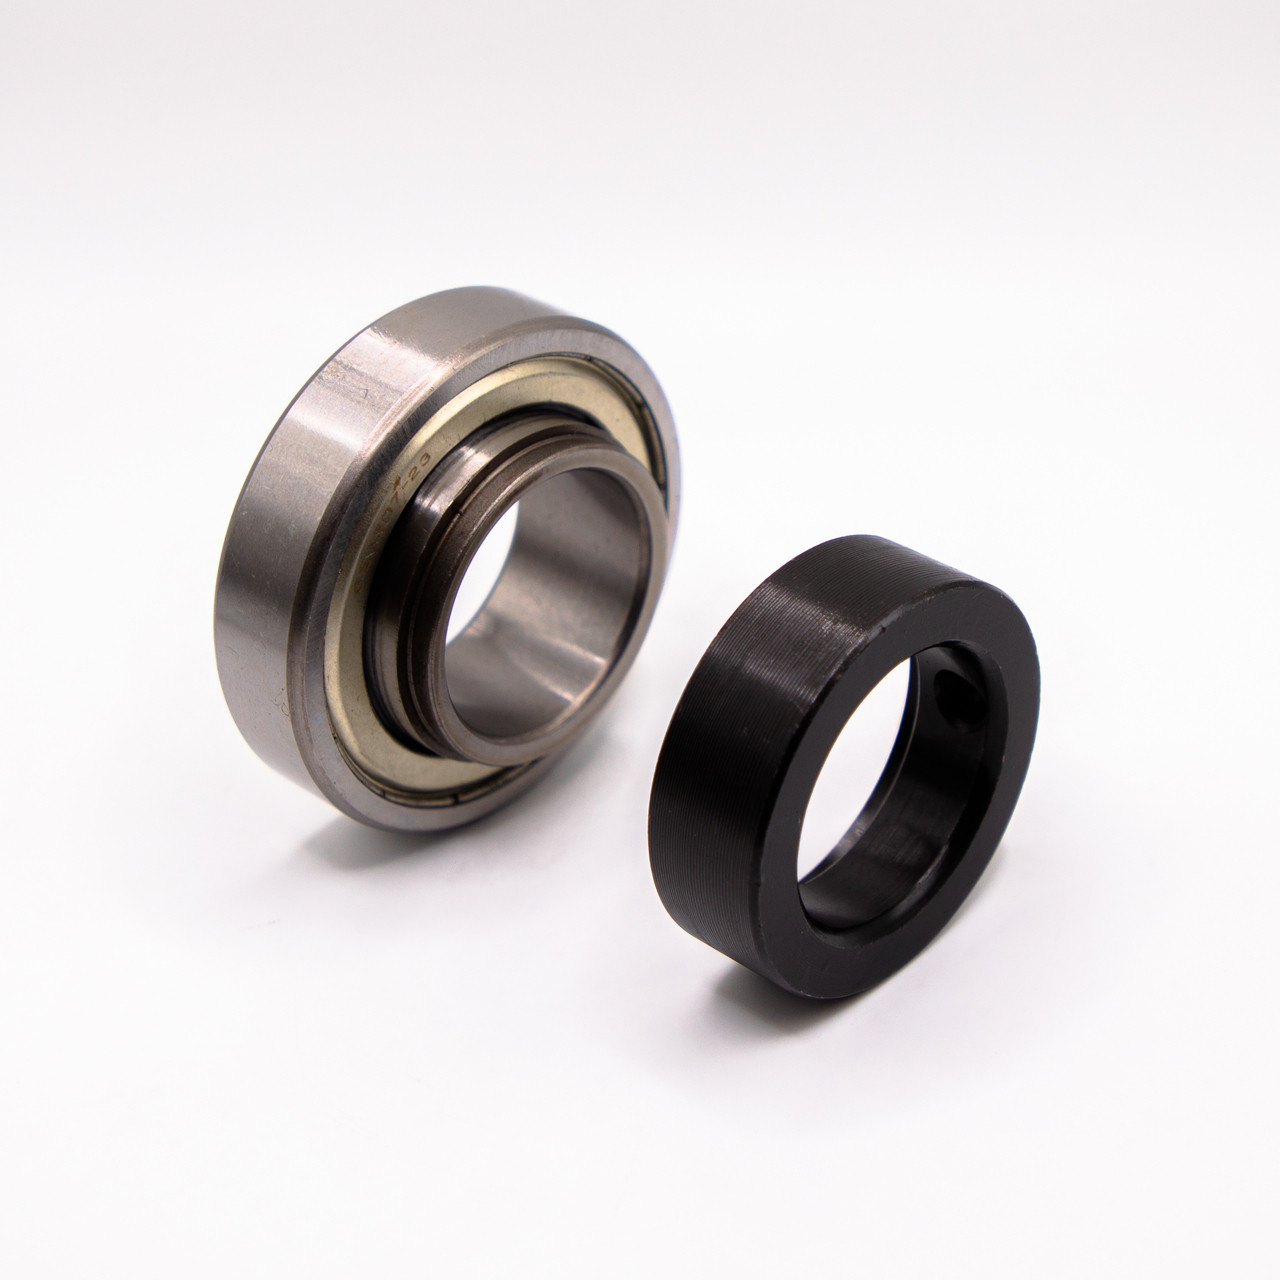 CSA209-26 Insert Ball Bearing 1-5/8x85x43.7 Separated Side View